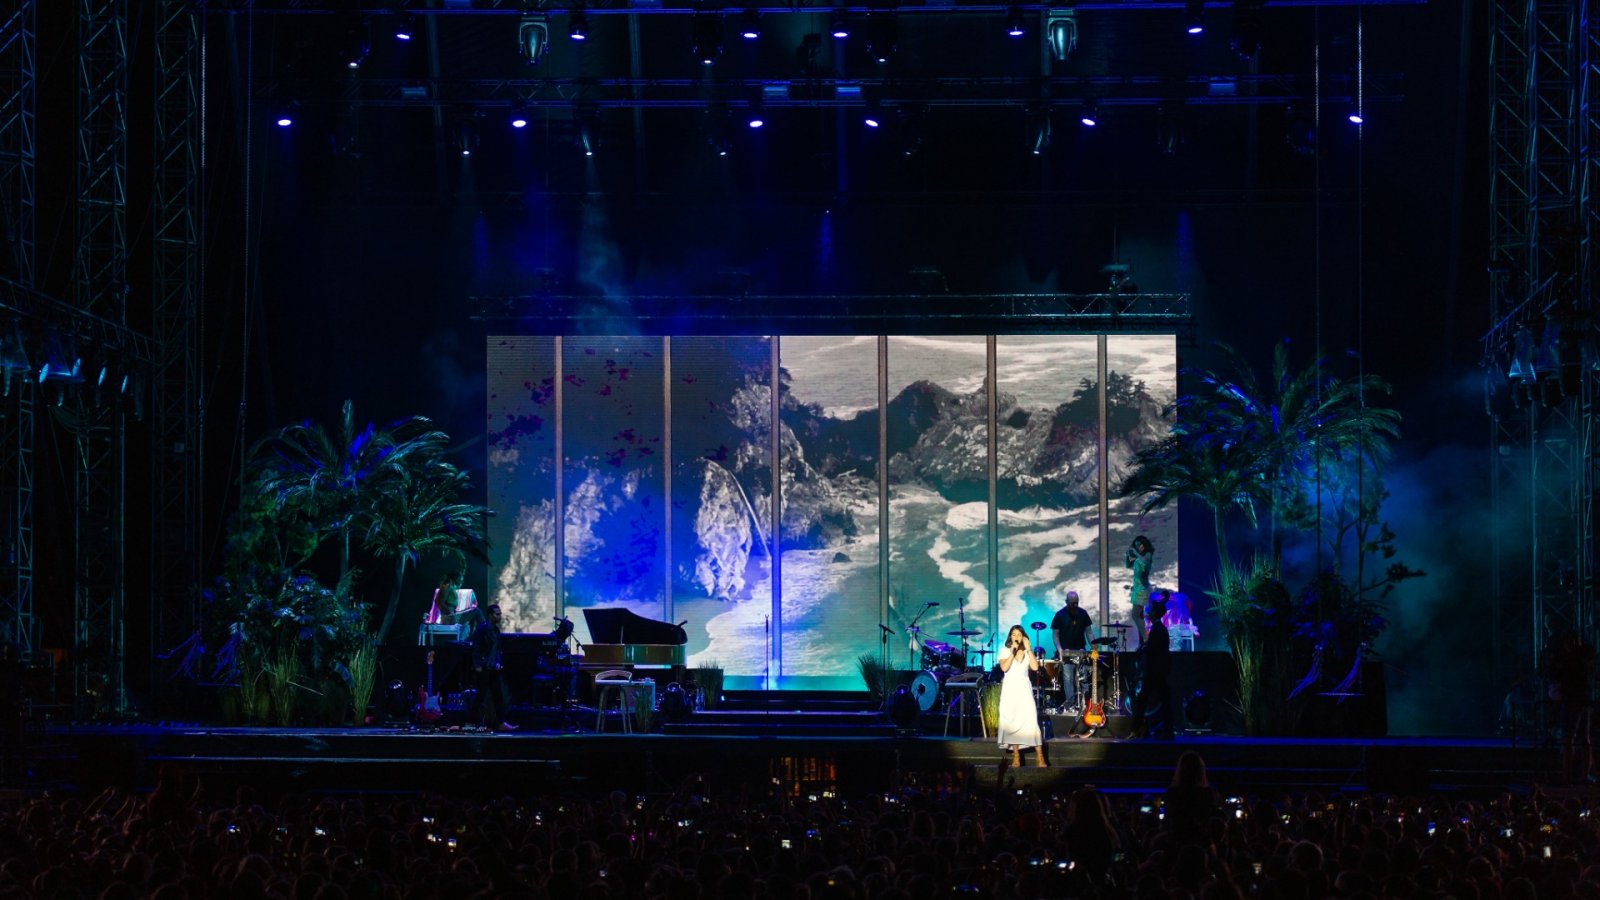 Lana Del Rey's new album explained: here’s why you should listen to it